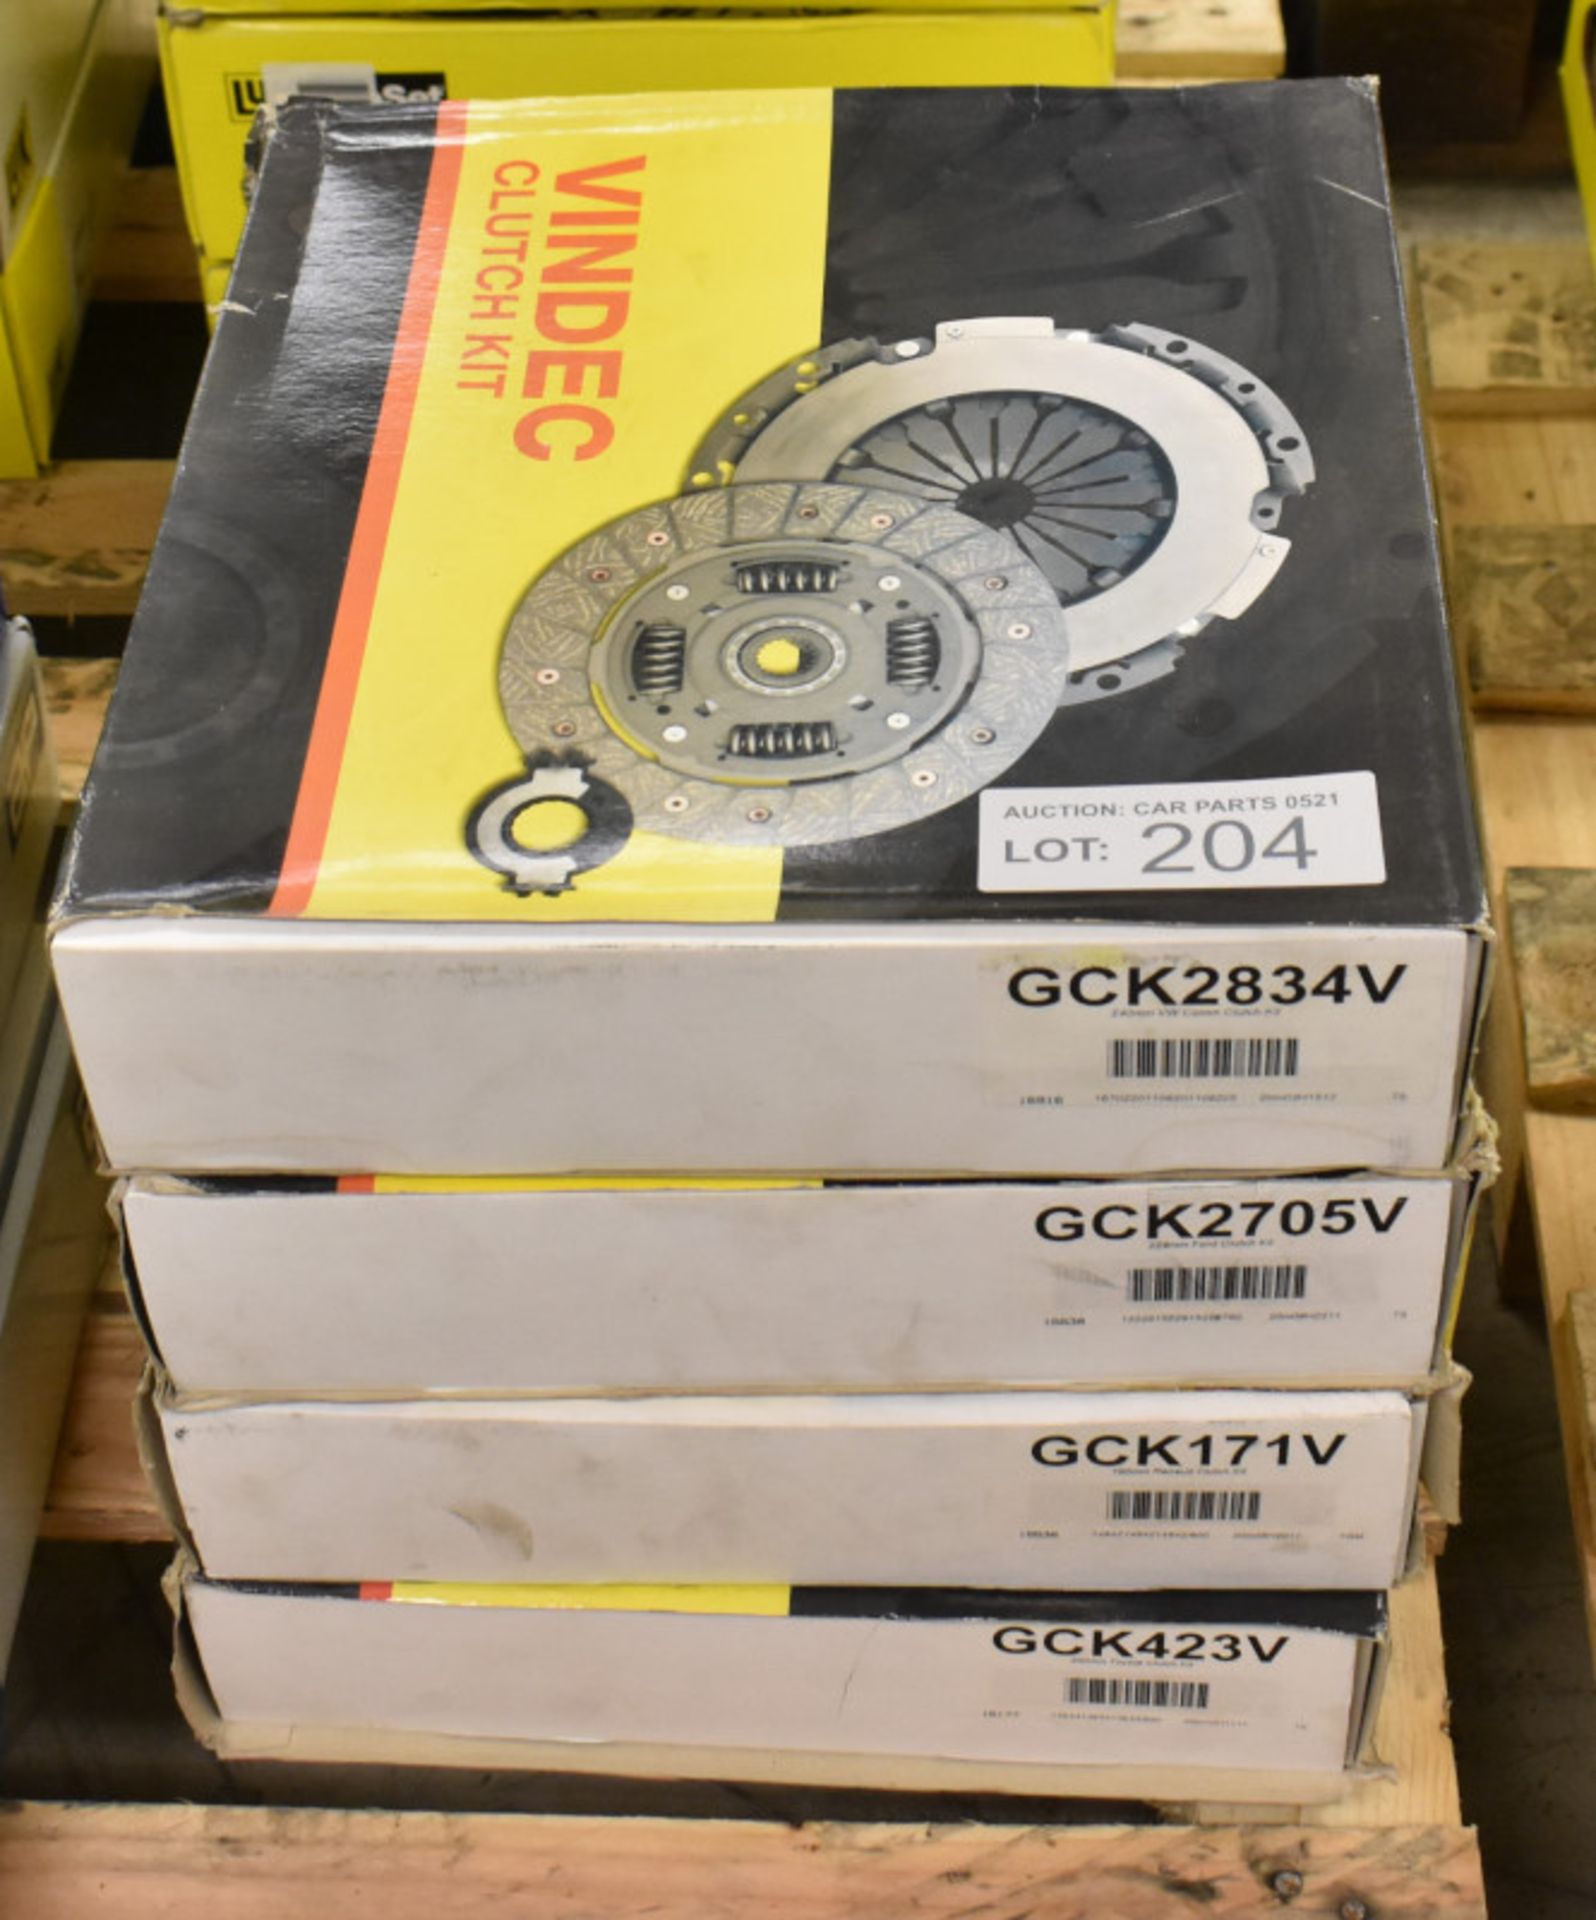 4x Vindec Clutch Kits - Please see pictures for examples of model numbers